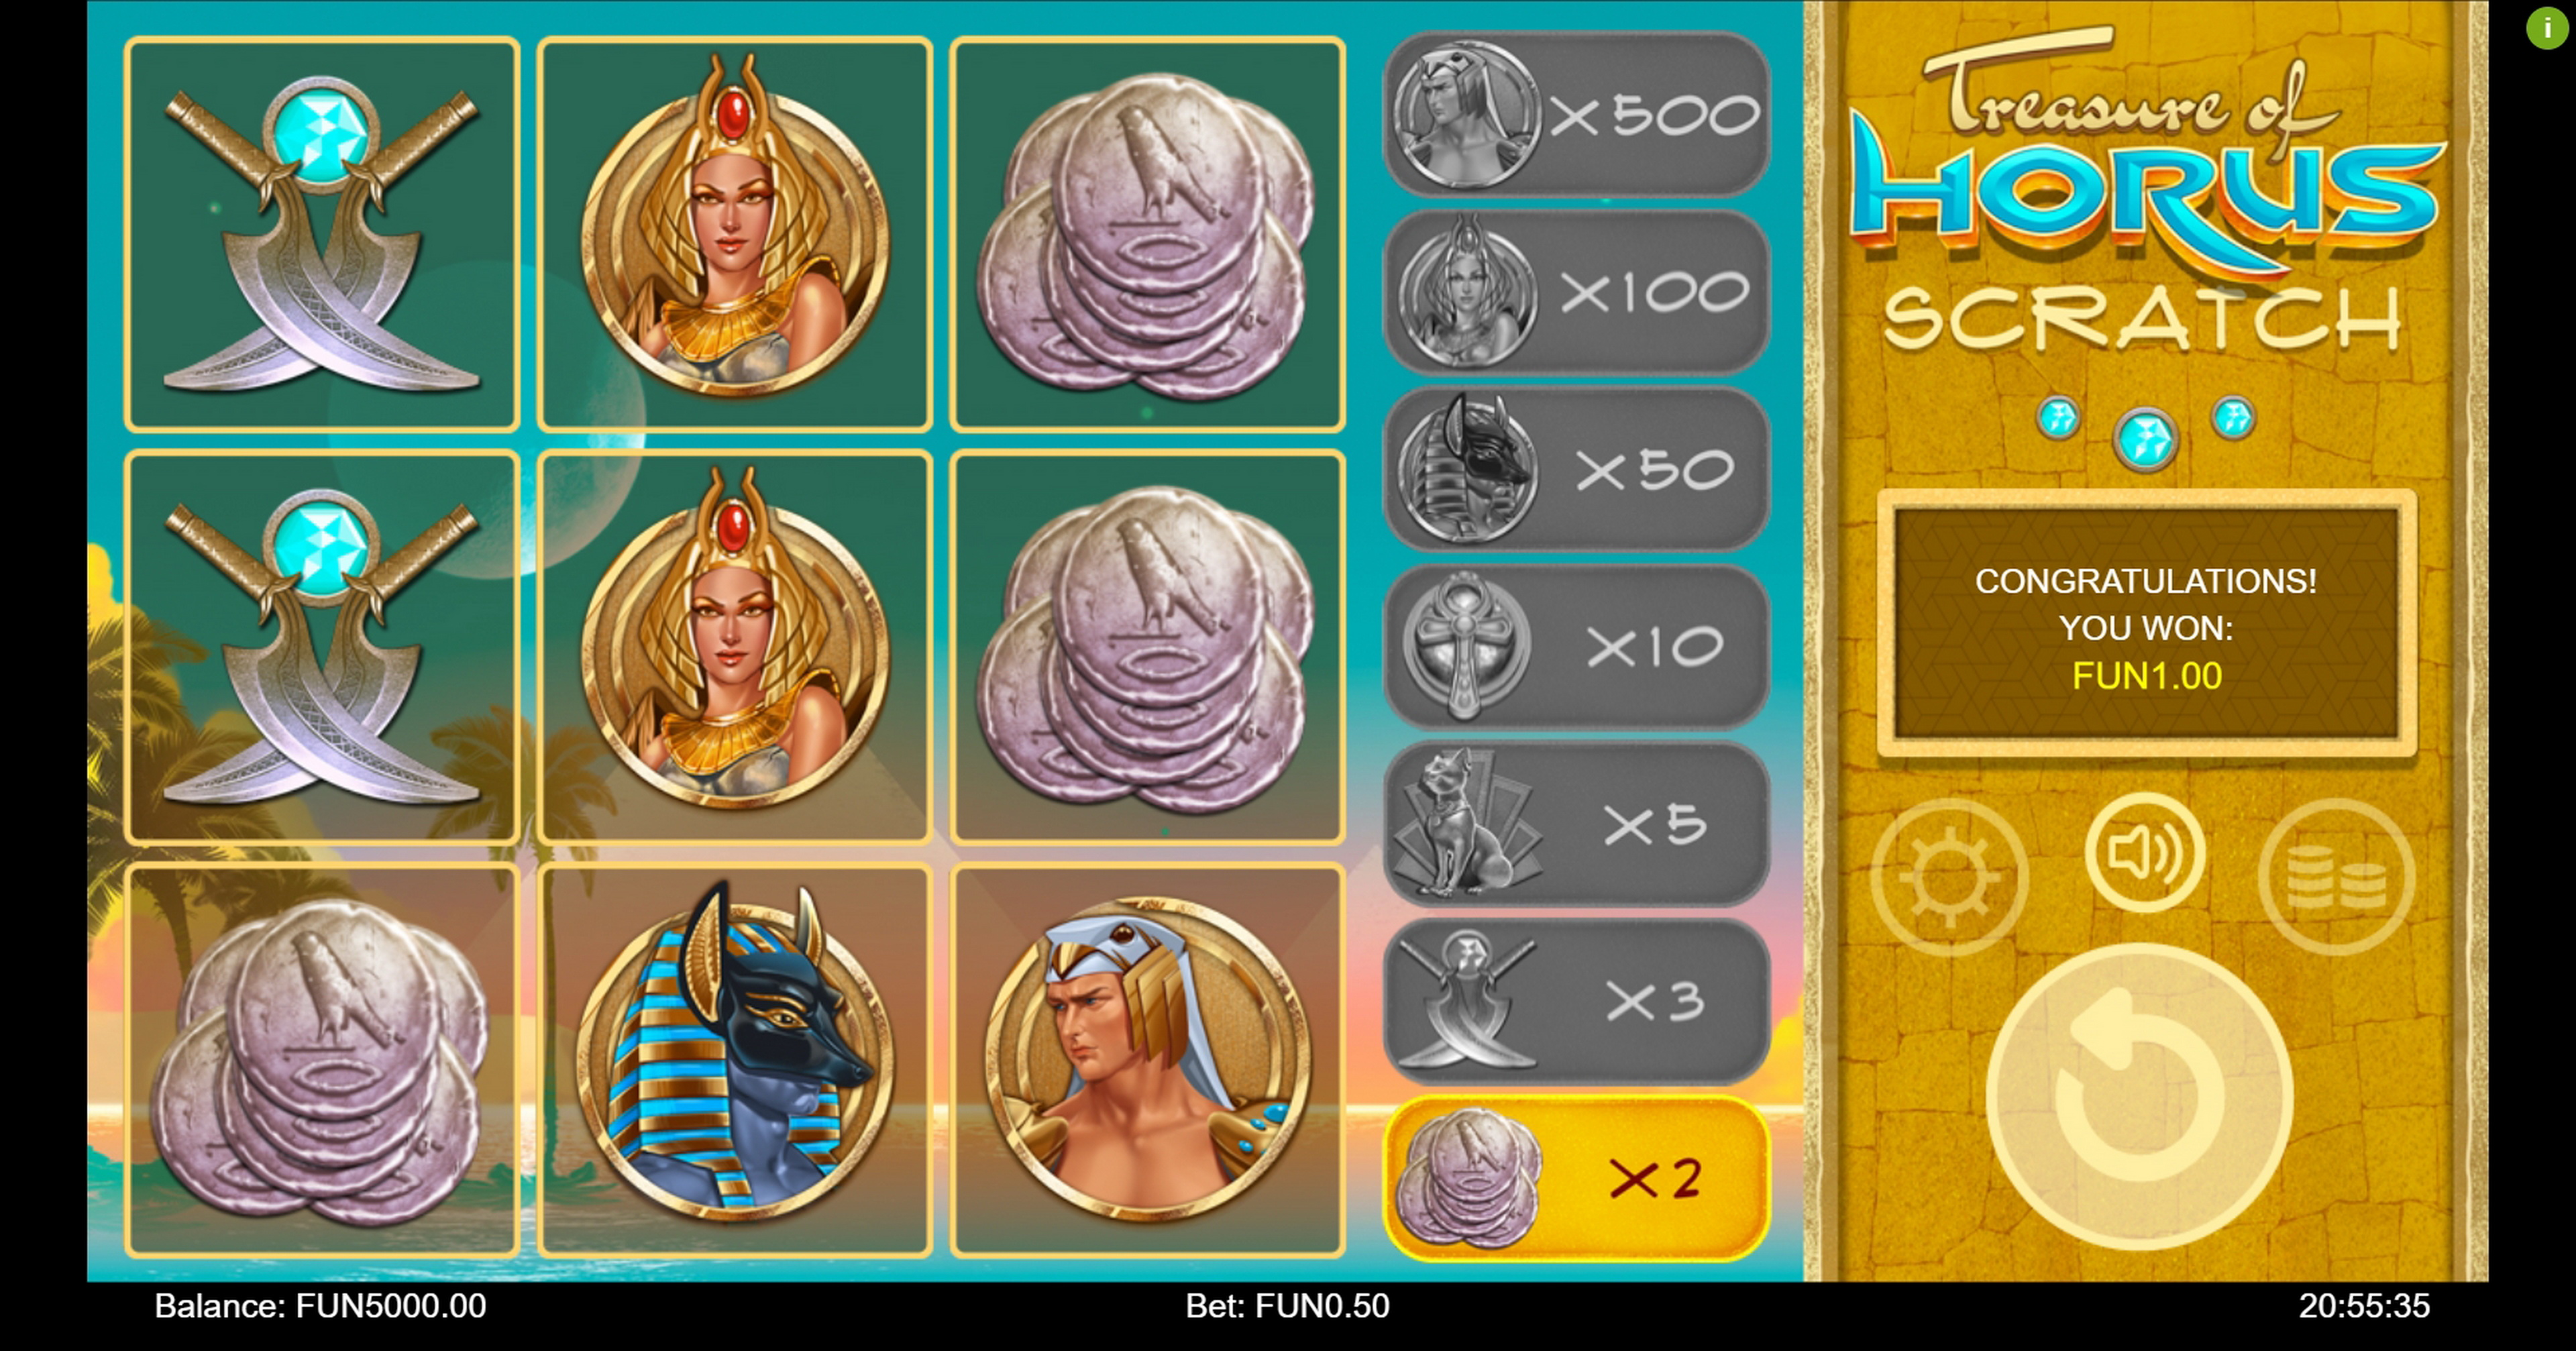 Win Money in Treasure of Horus Scratch Free Slot Game by Iron Dog Studios